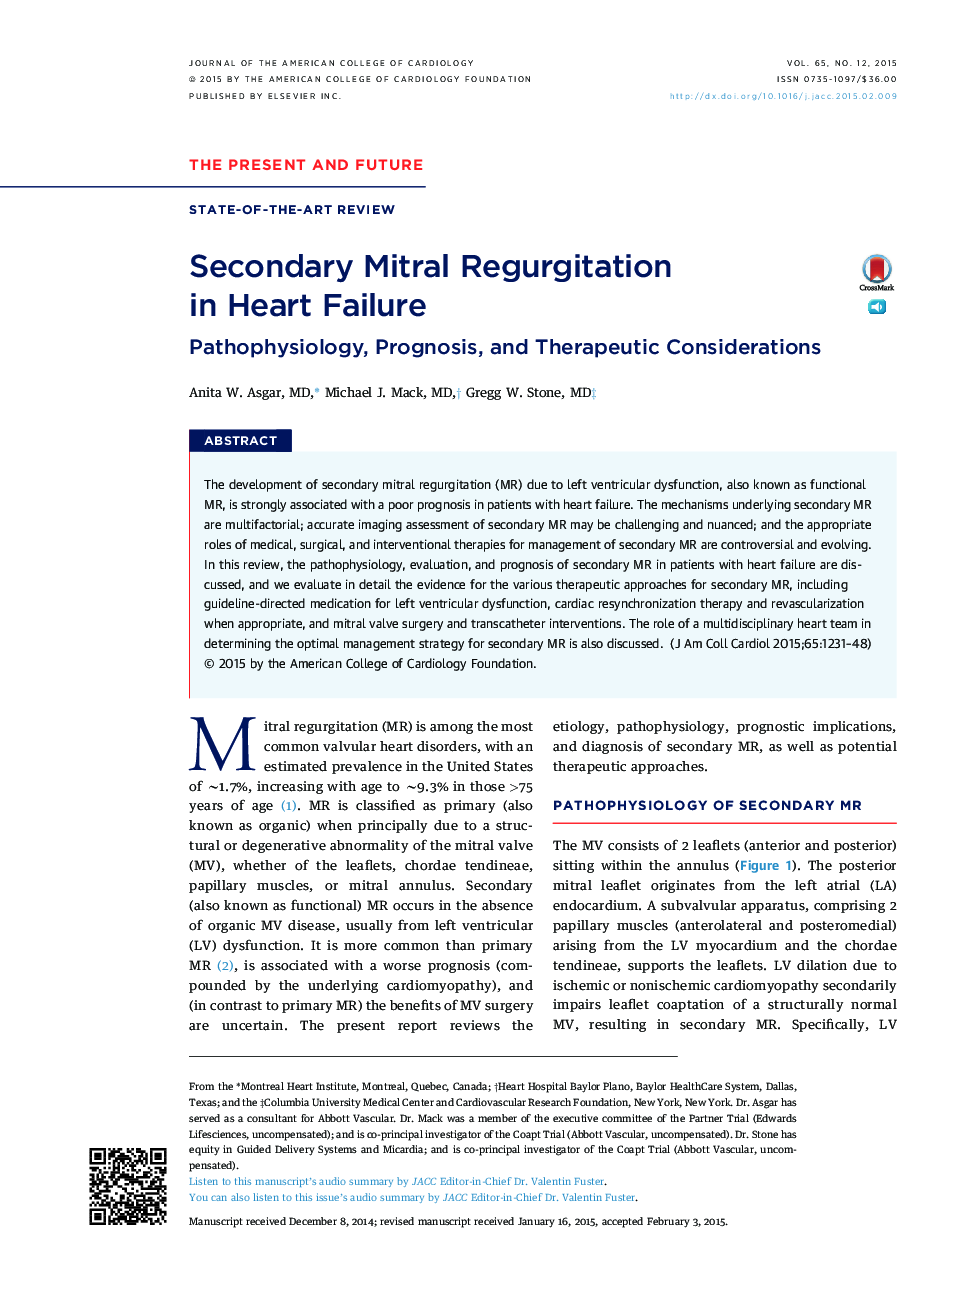 Secondary Mitral Regurgitation inÂ HeartÂ Failure: Pathophysiology, Prognosis, and Therapeutic Considerations